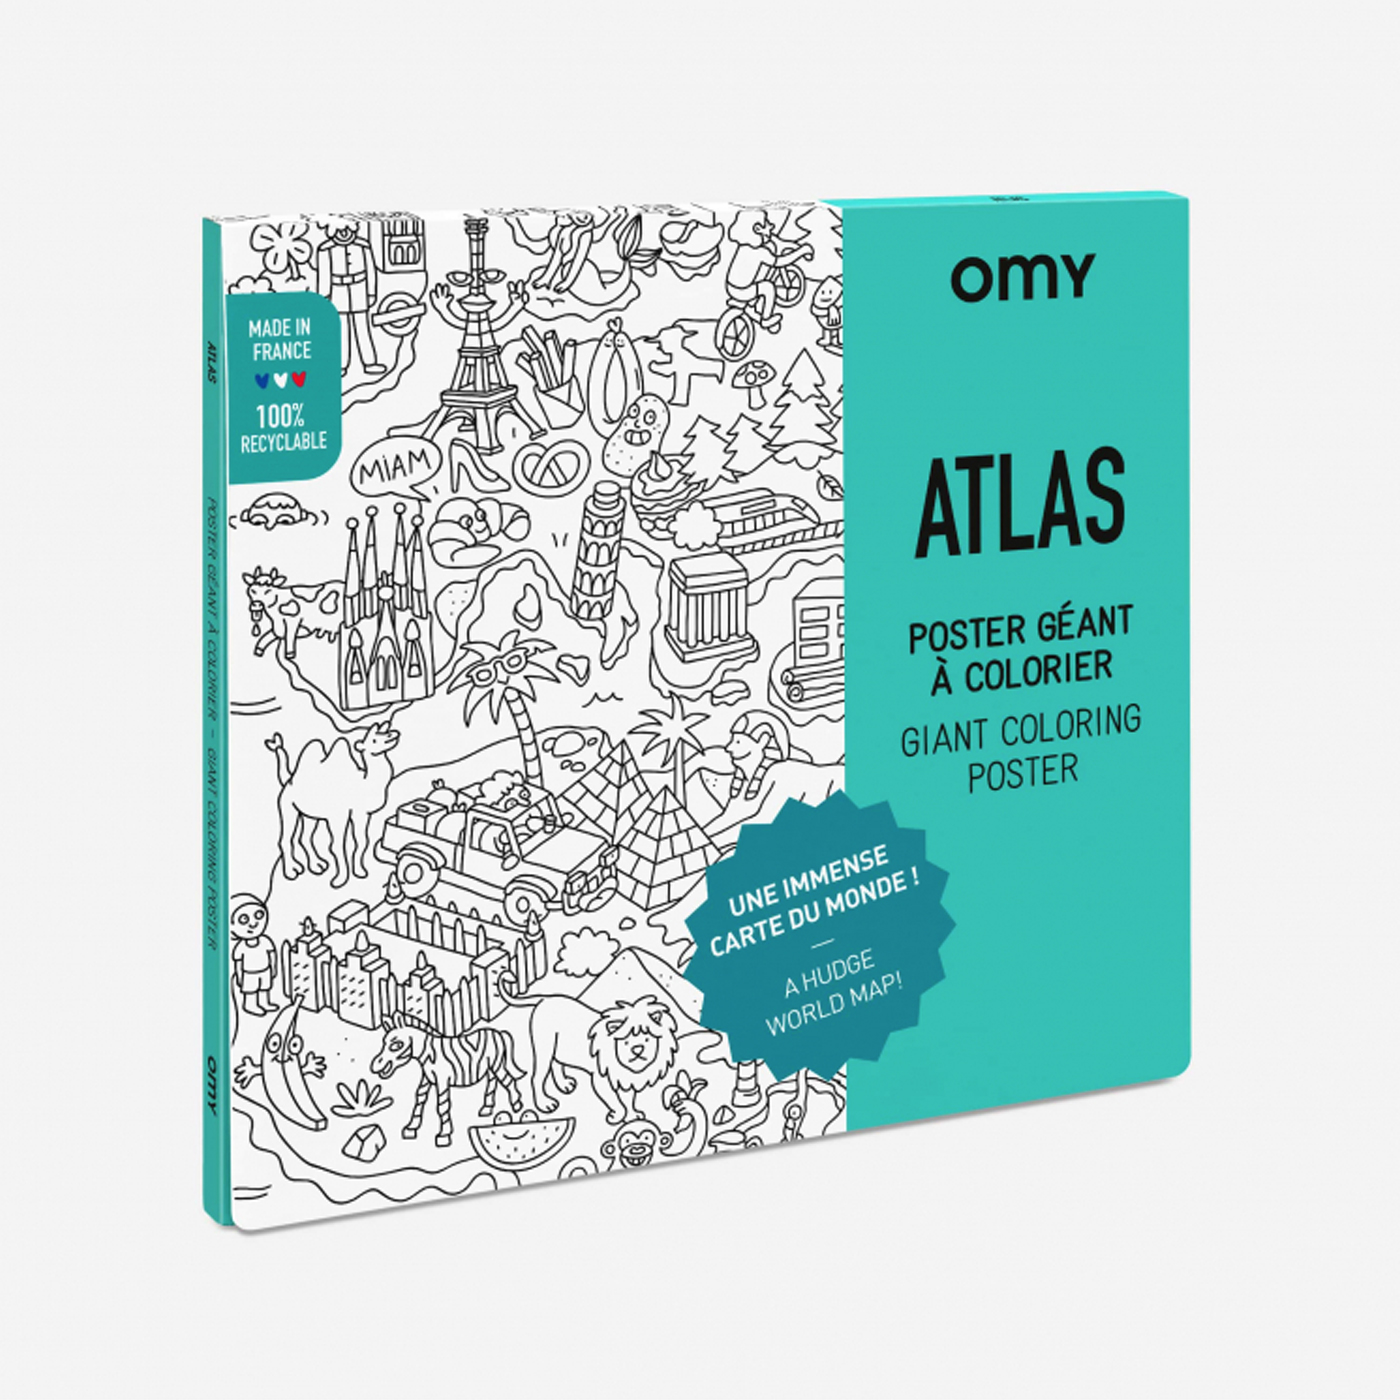  Omy Coloring Poster  | Atlas